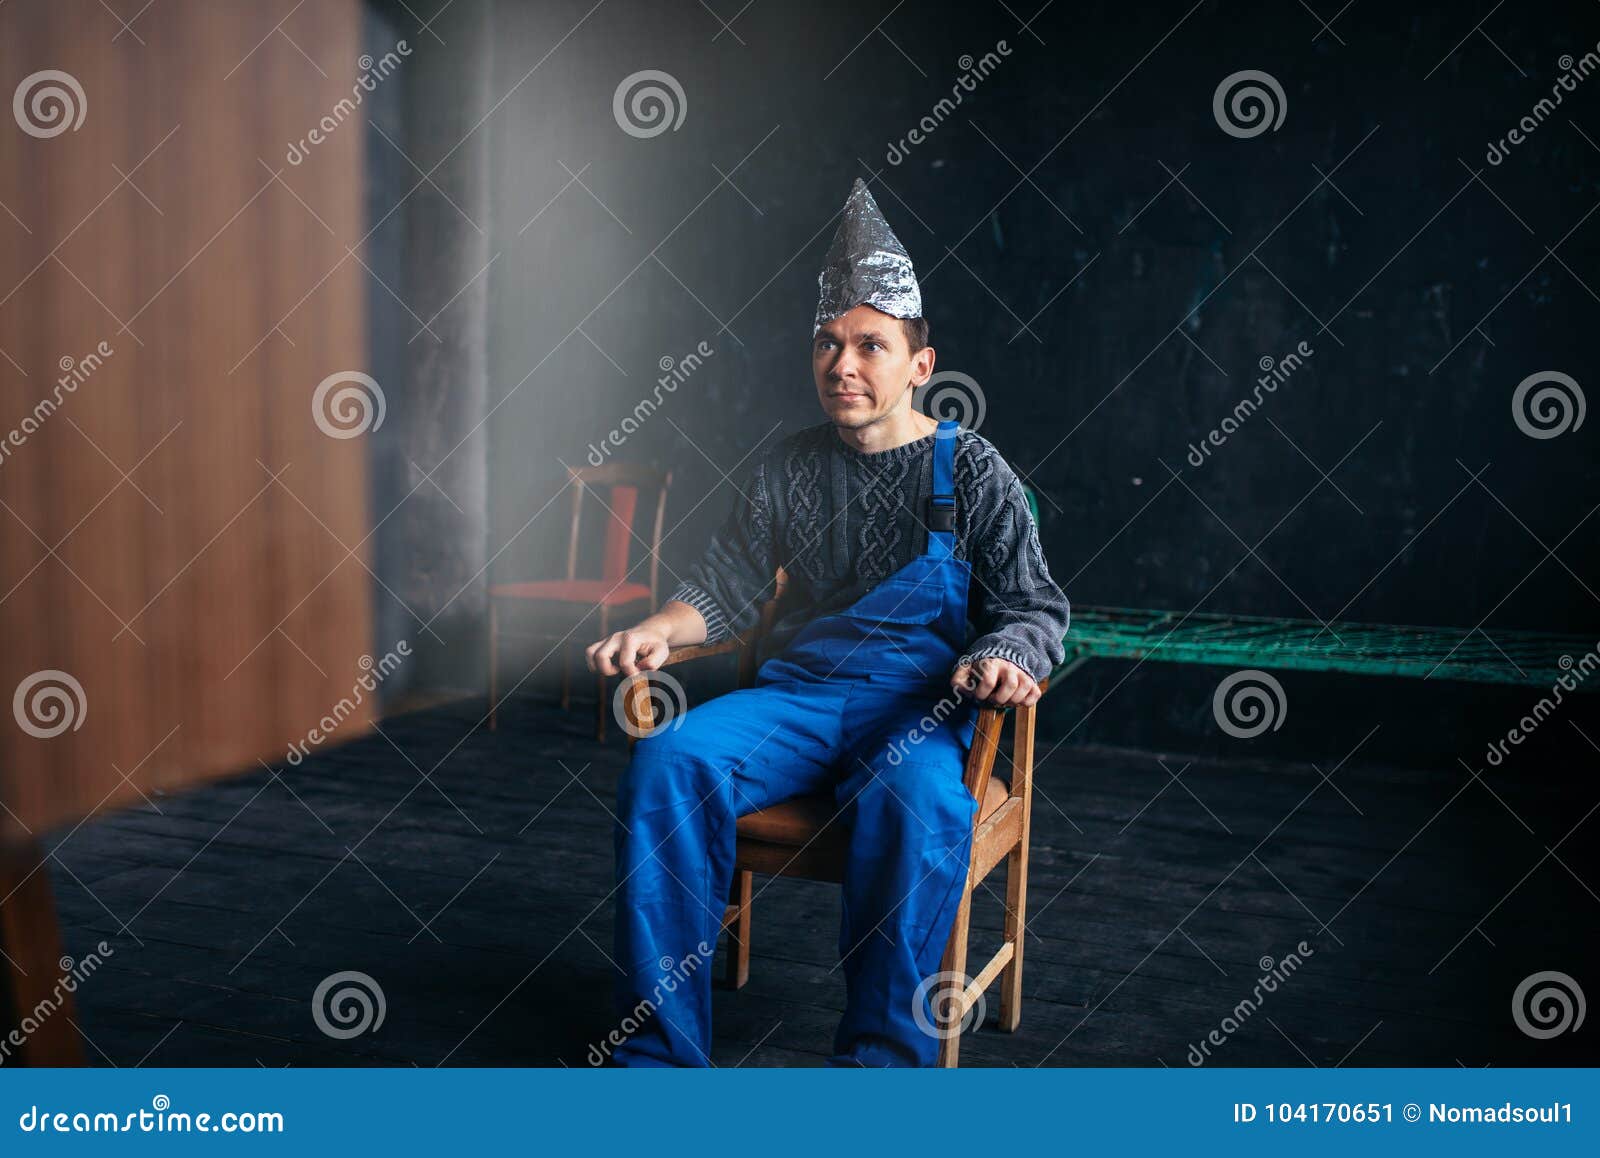 man in tinfoil hat sits in chair, paranoia concept